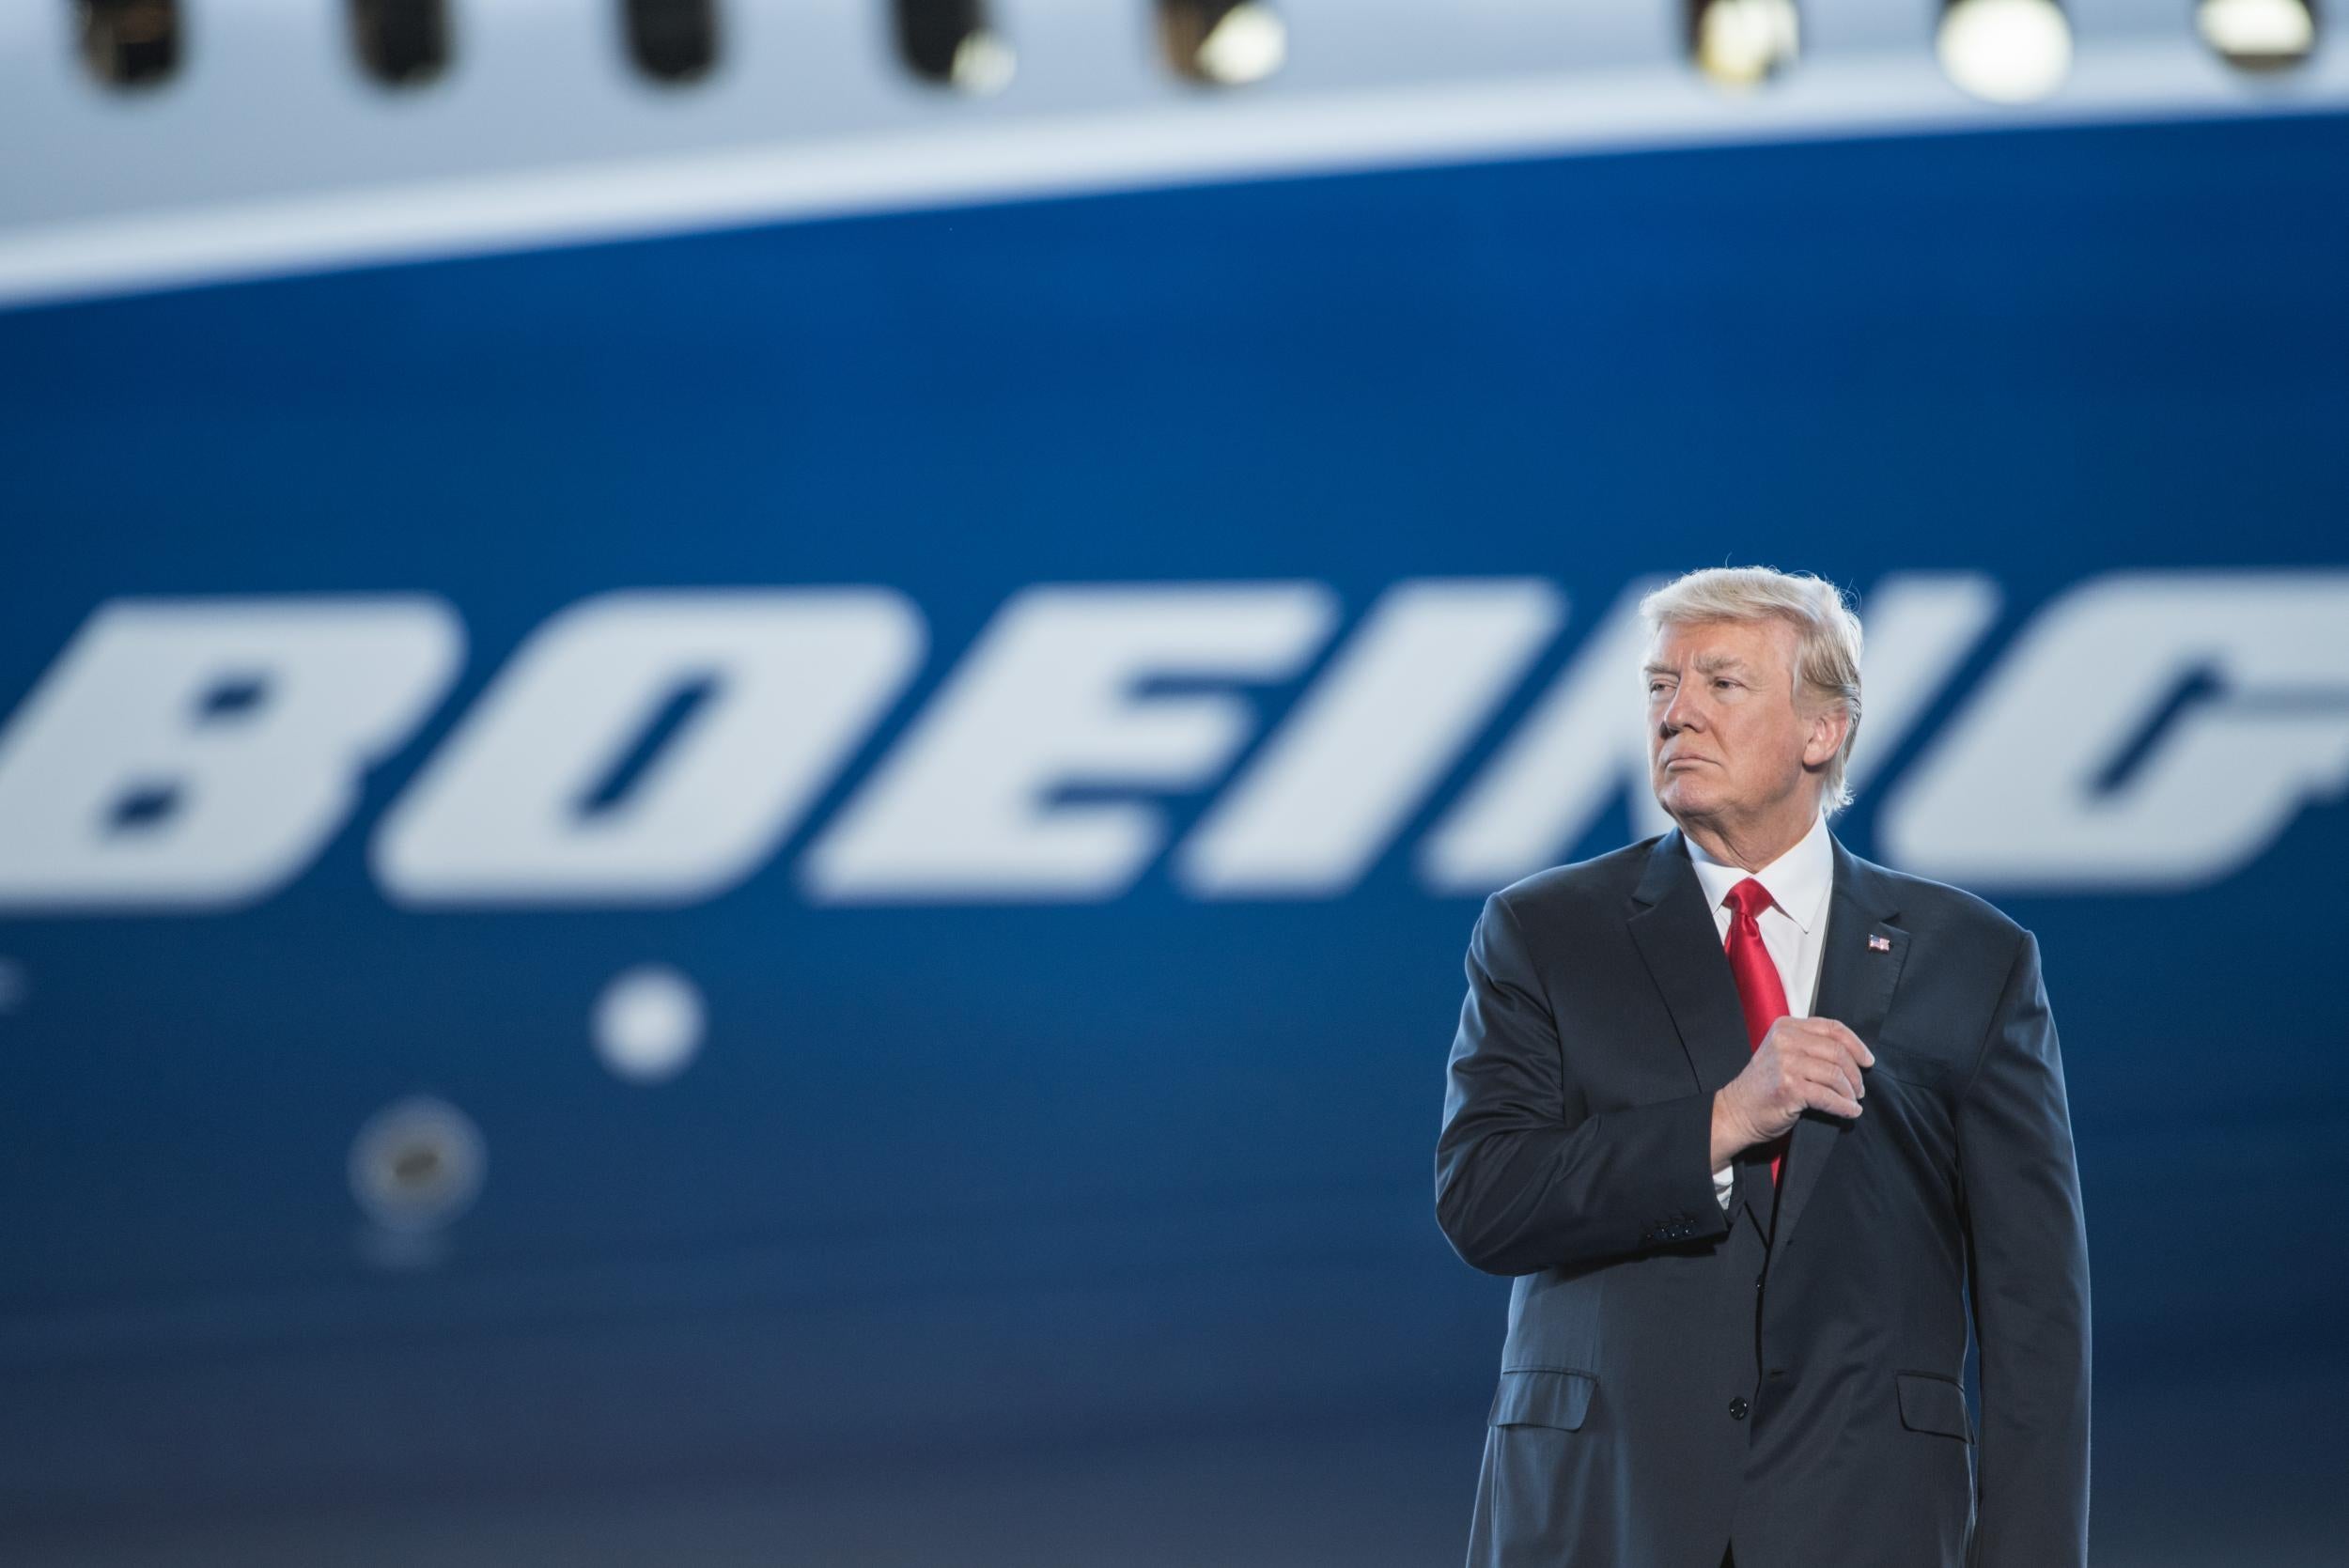 Donald Trump visiting the Boeing plant - but sometimes he might cause you a delay